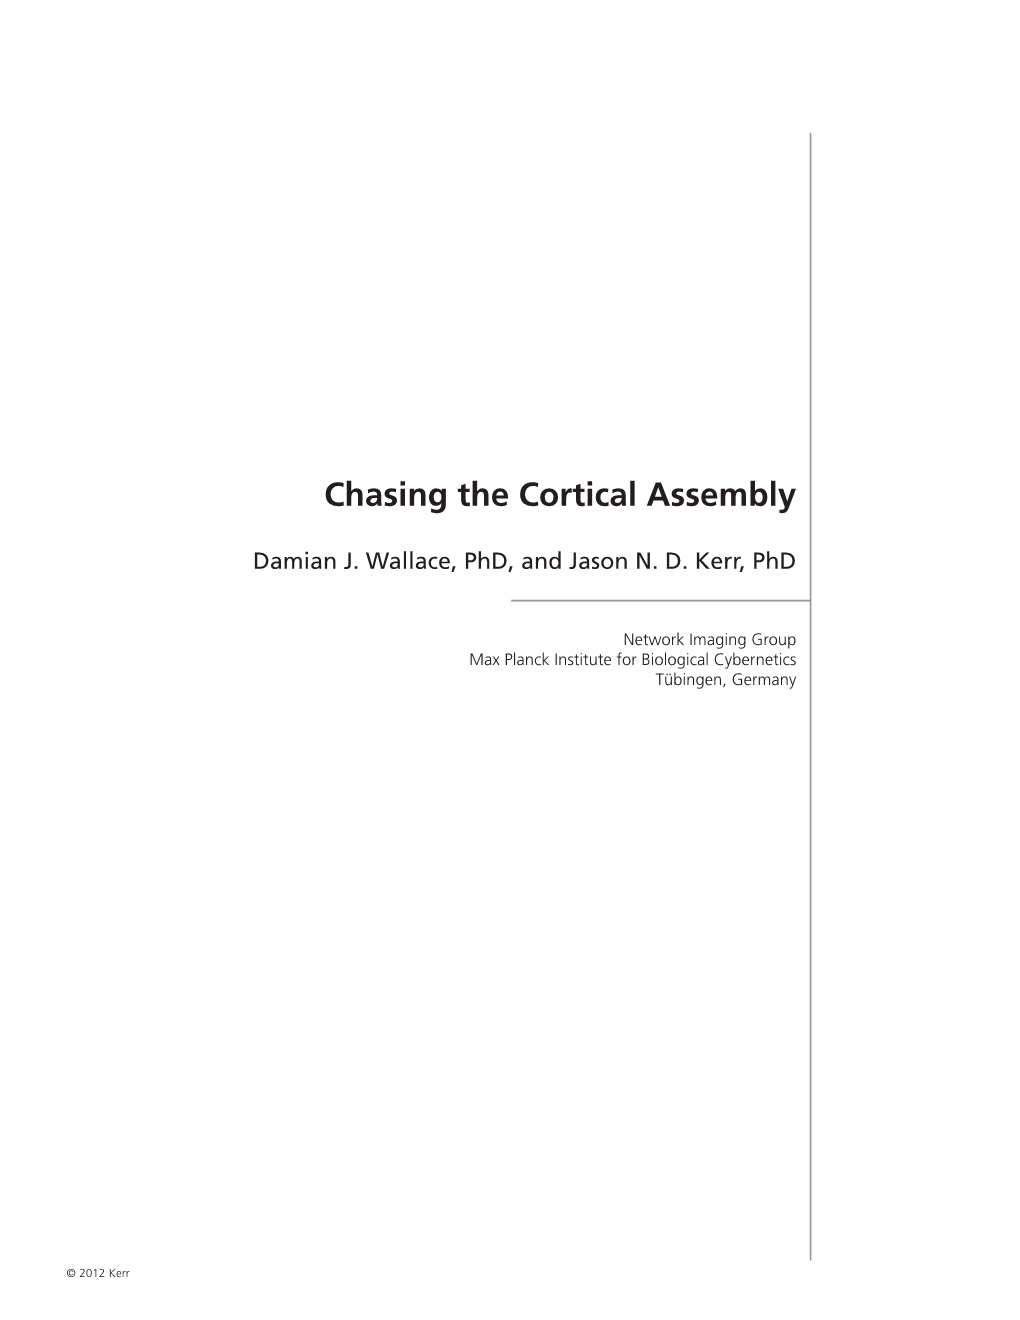 Chasing the Cortical Assembly